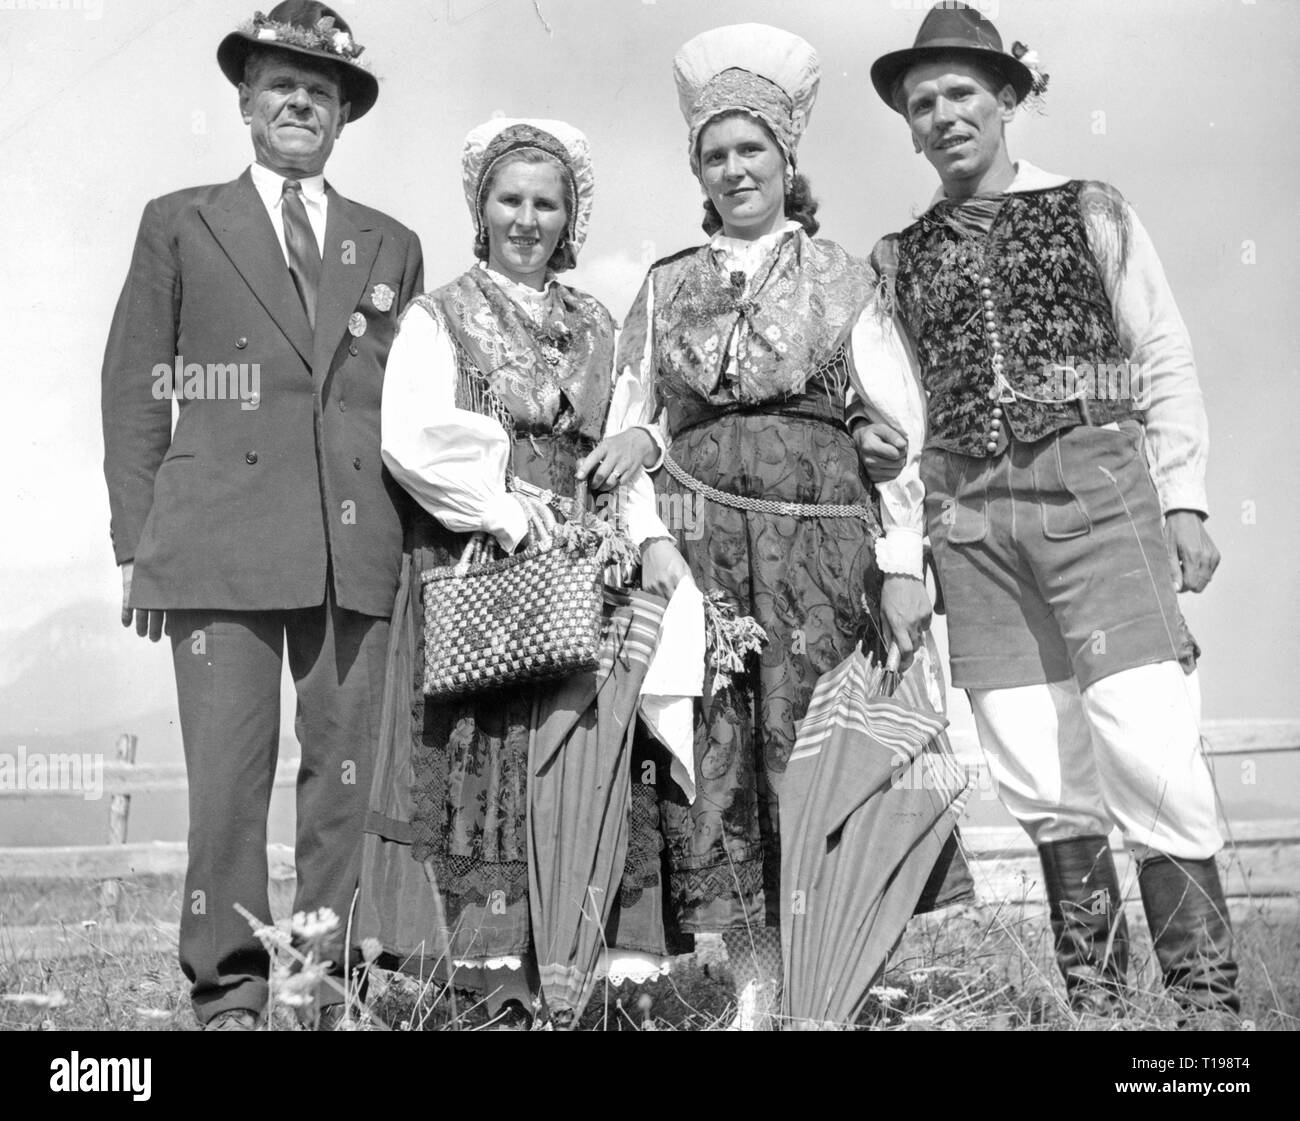 Costume 1950s Black and White Stock Photos & Images - Alamy